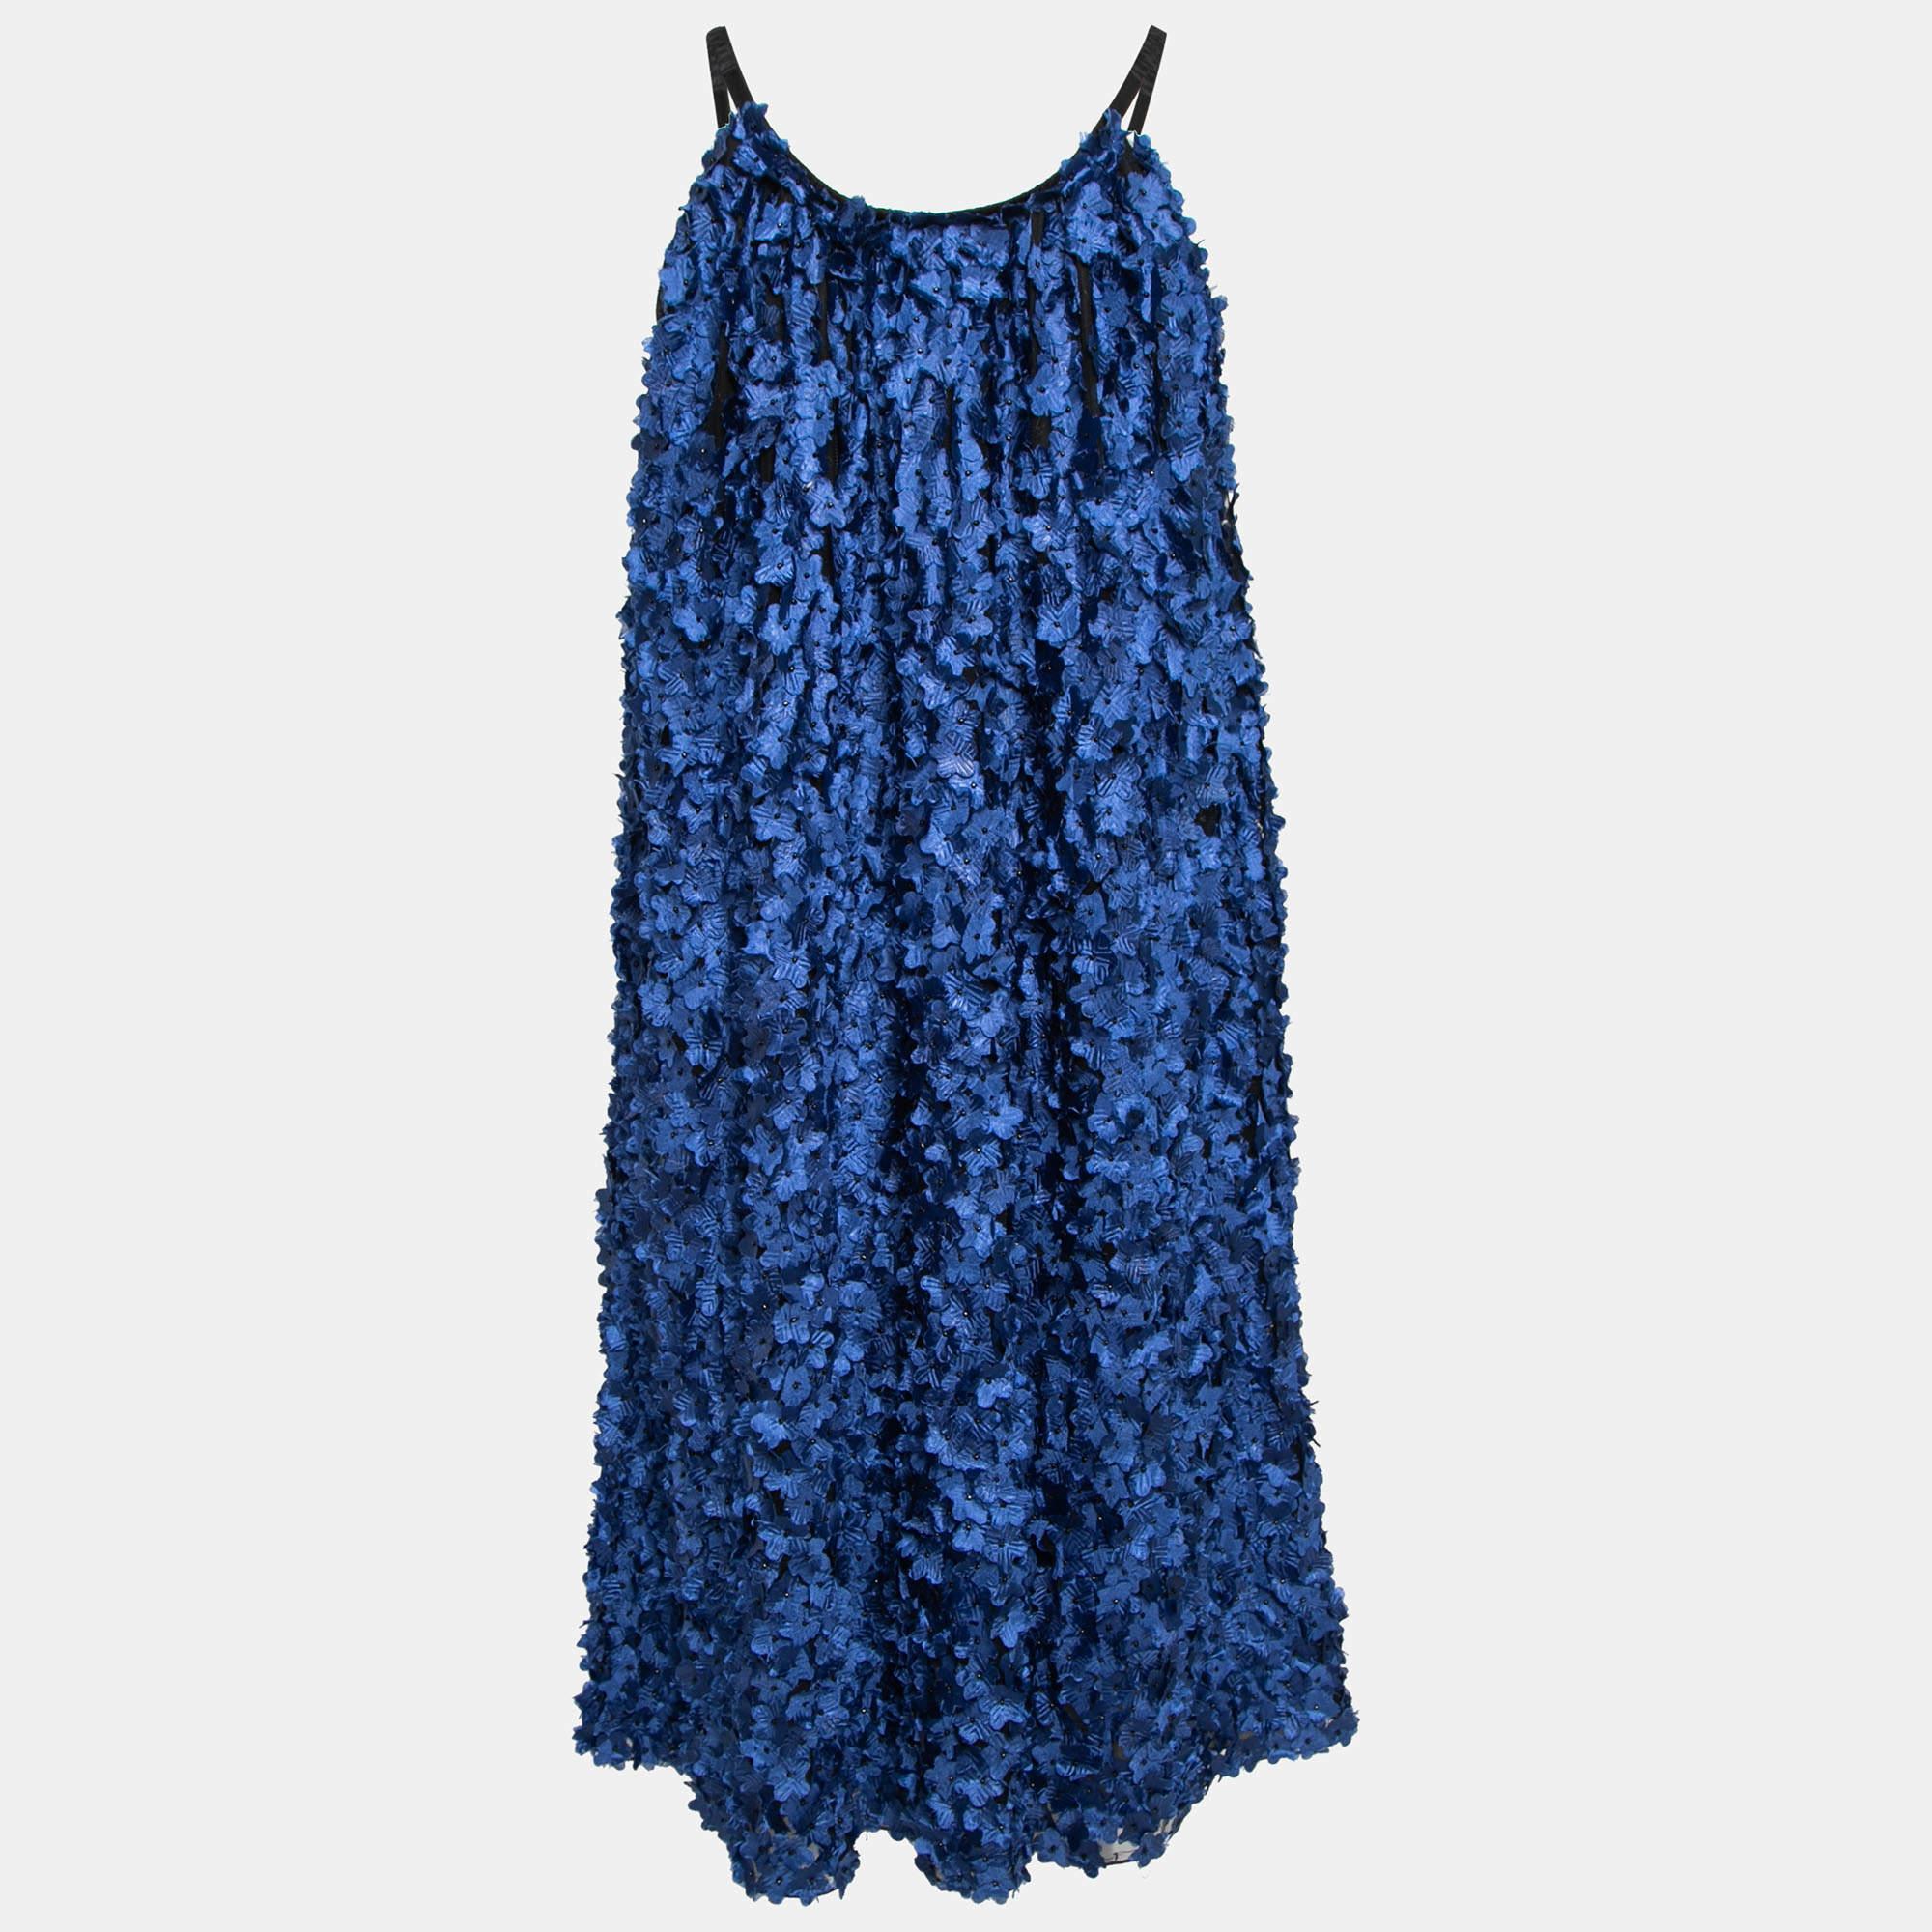 Summertime calls for beautifully flowy silhouettes like this Giorgio Armani dress. Stitched using blue tulle fabric, this shift dress exhibits floral appliques and a sleeveless style. It comes with two functional pockets. Style this Giorgio Armani